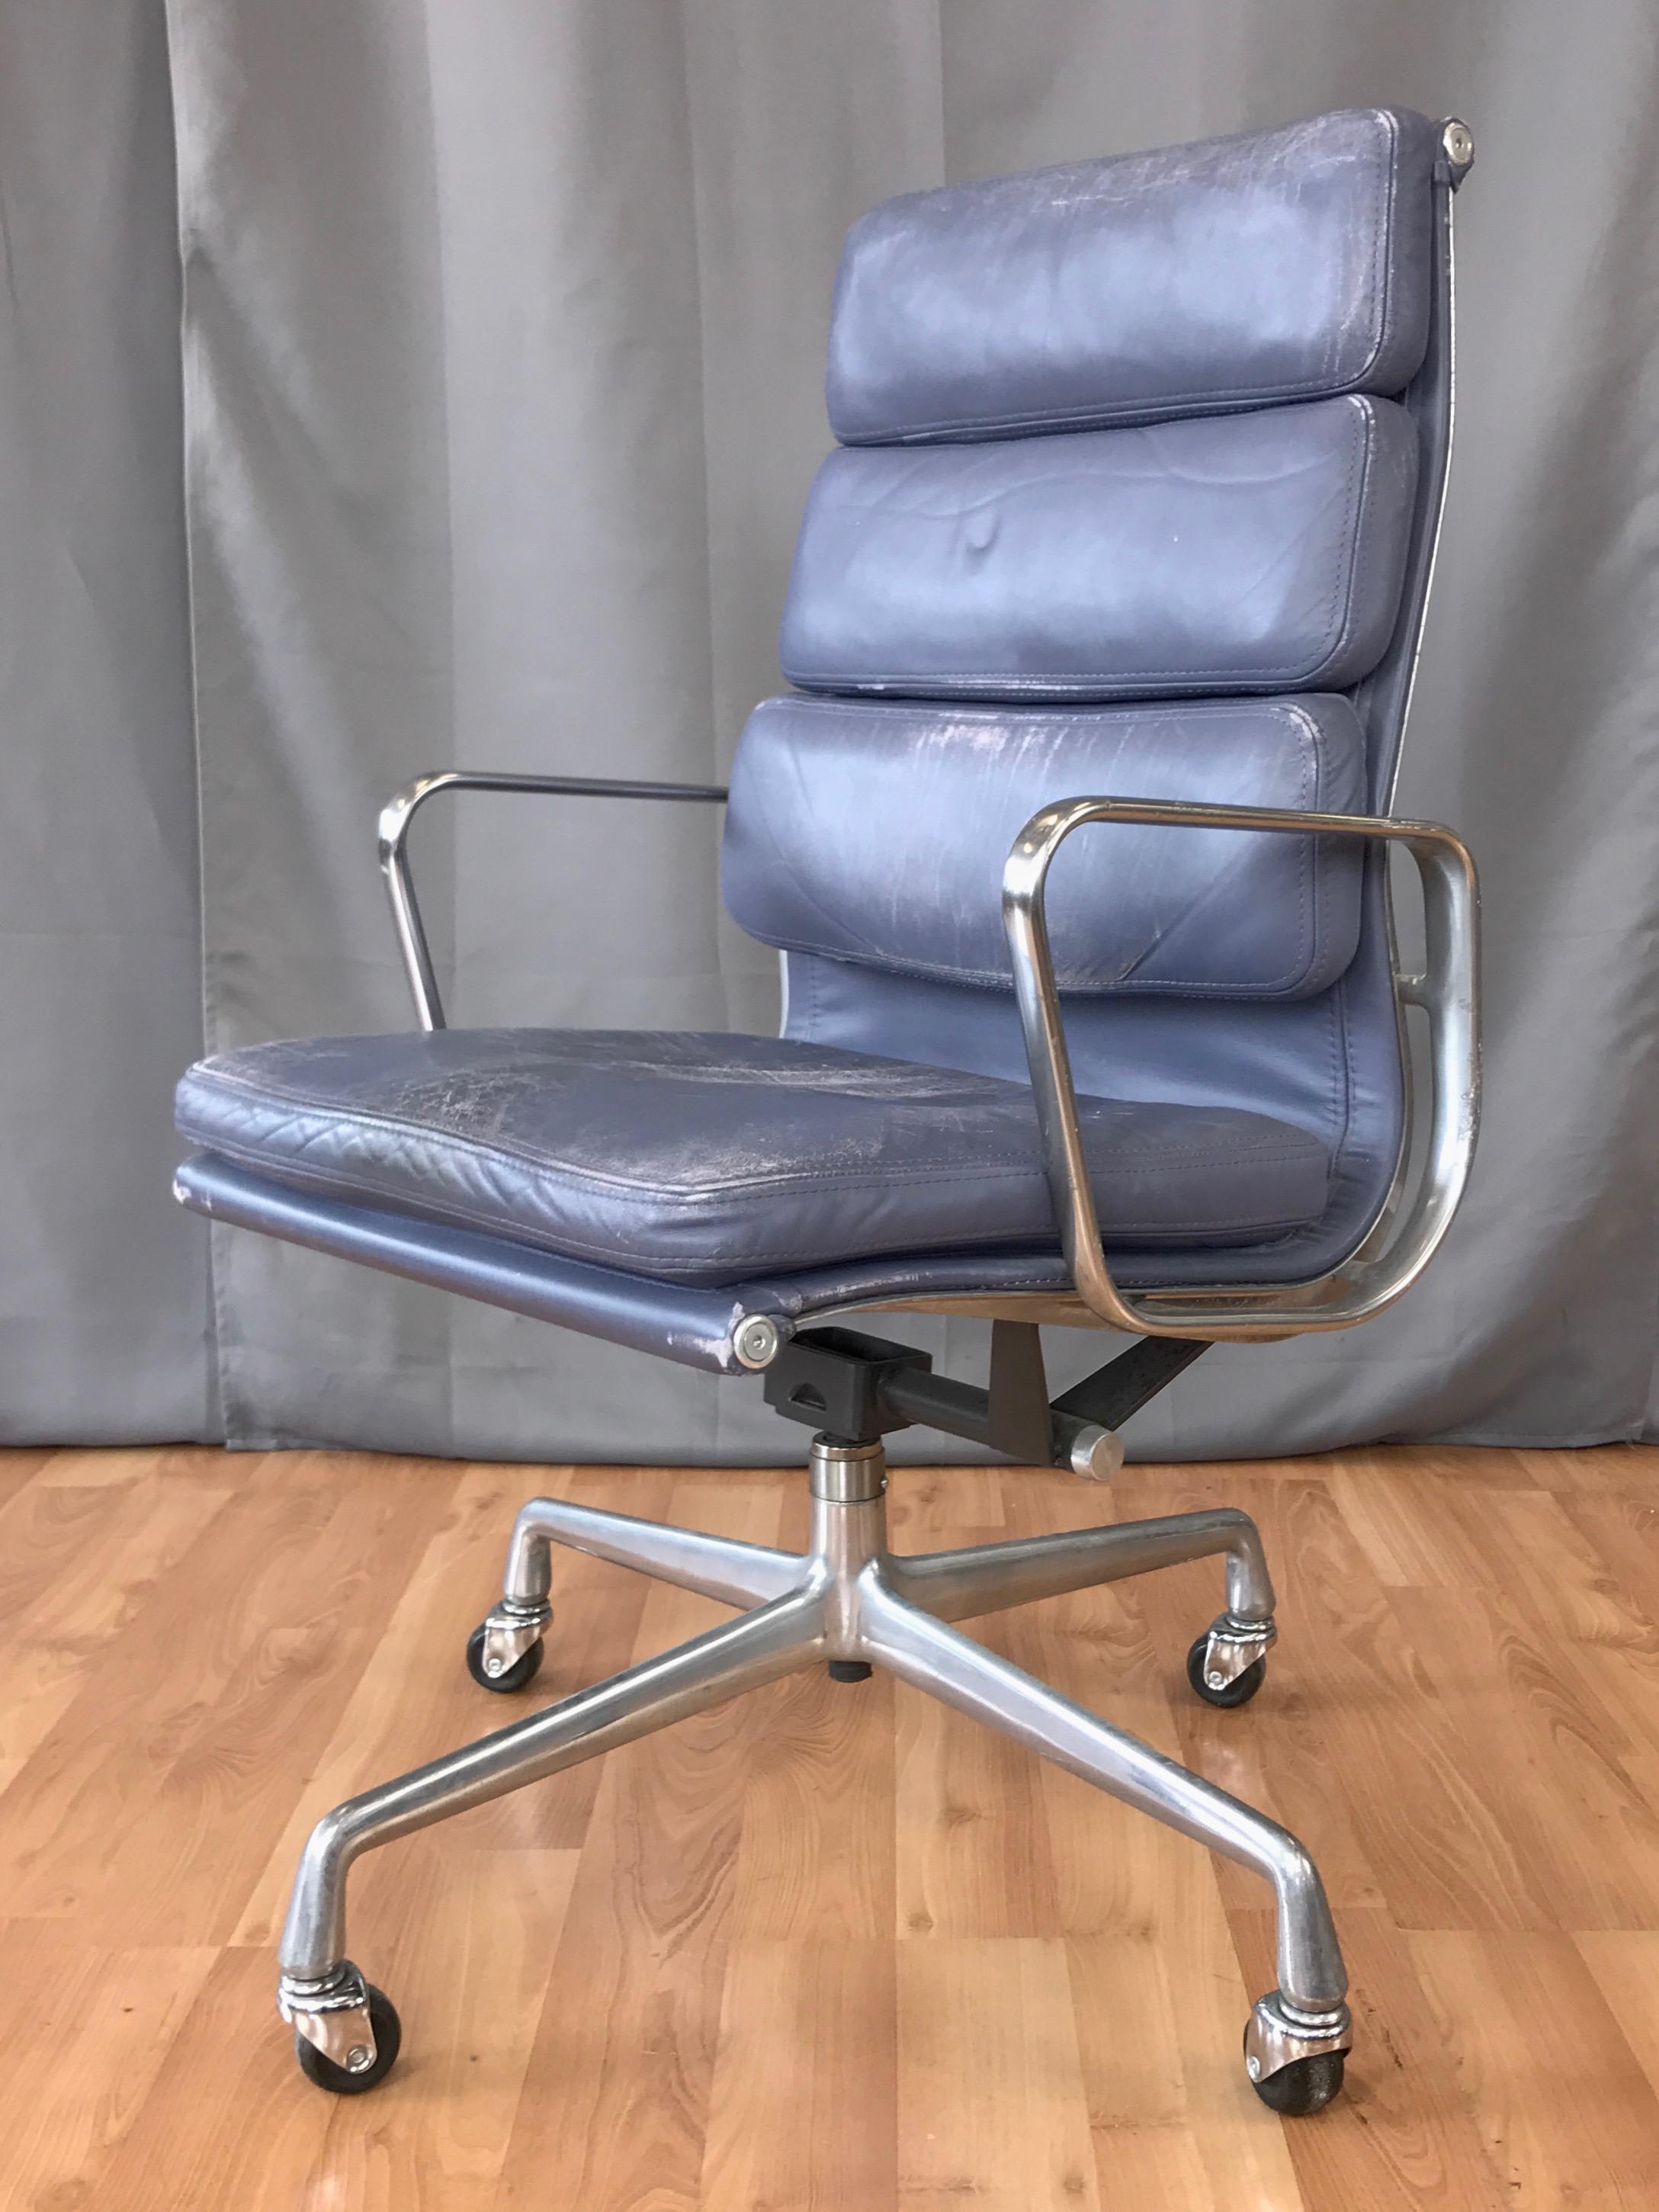 A leather Soft Pad Executive Chair by Charles and Ray Eames for Herman Miller, designed in 1969 and produced in 1985.

Shares the Eames Aluminum Group’s clean lines and timeless aesthetic, but with individual two-inch-thick cushions that enhance the